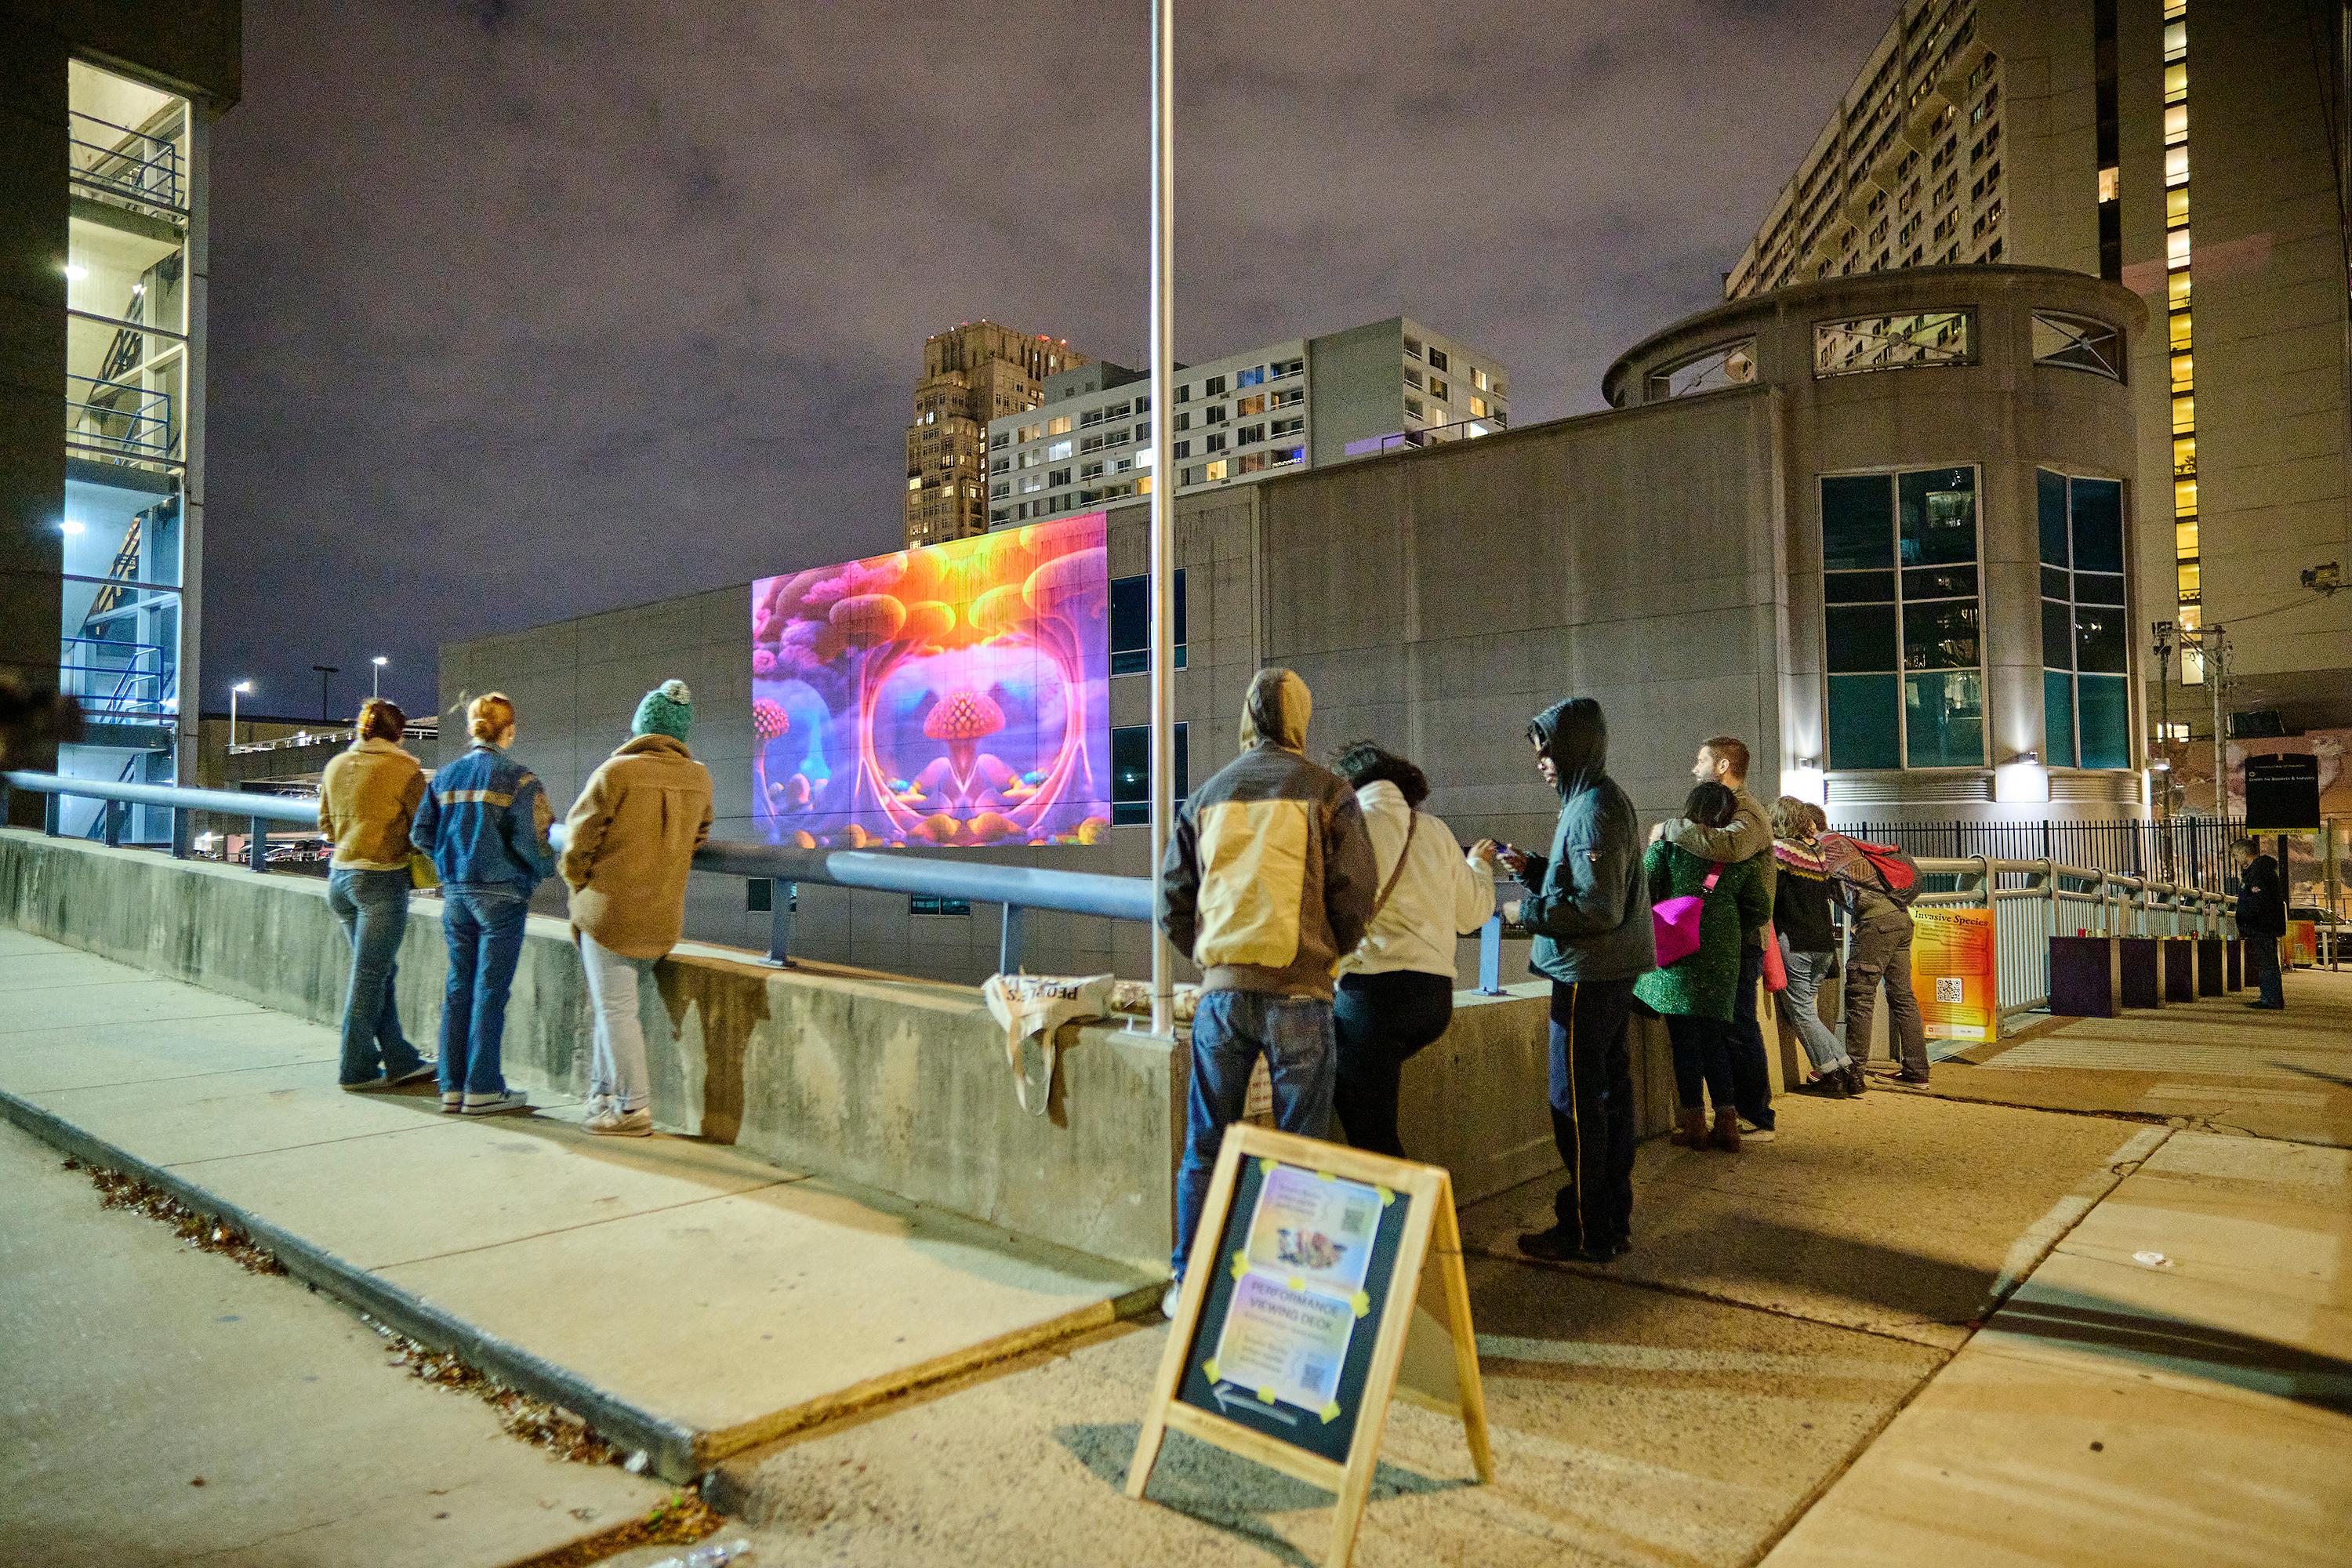 Photo courtesy of Albert Yee. Night time picture of people looking at a projection of the exhibition against the building wall.